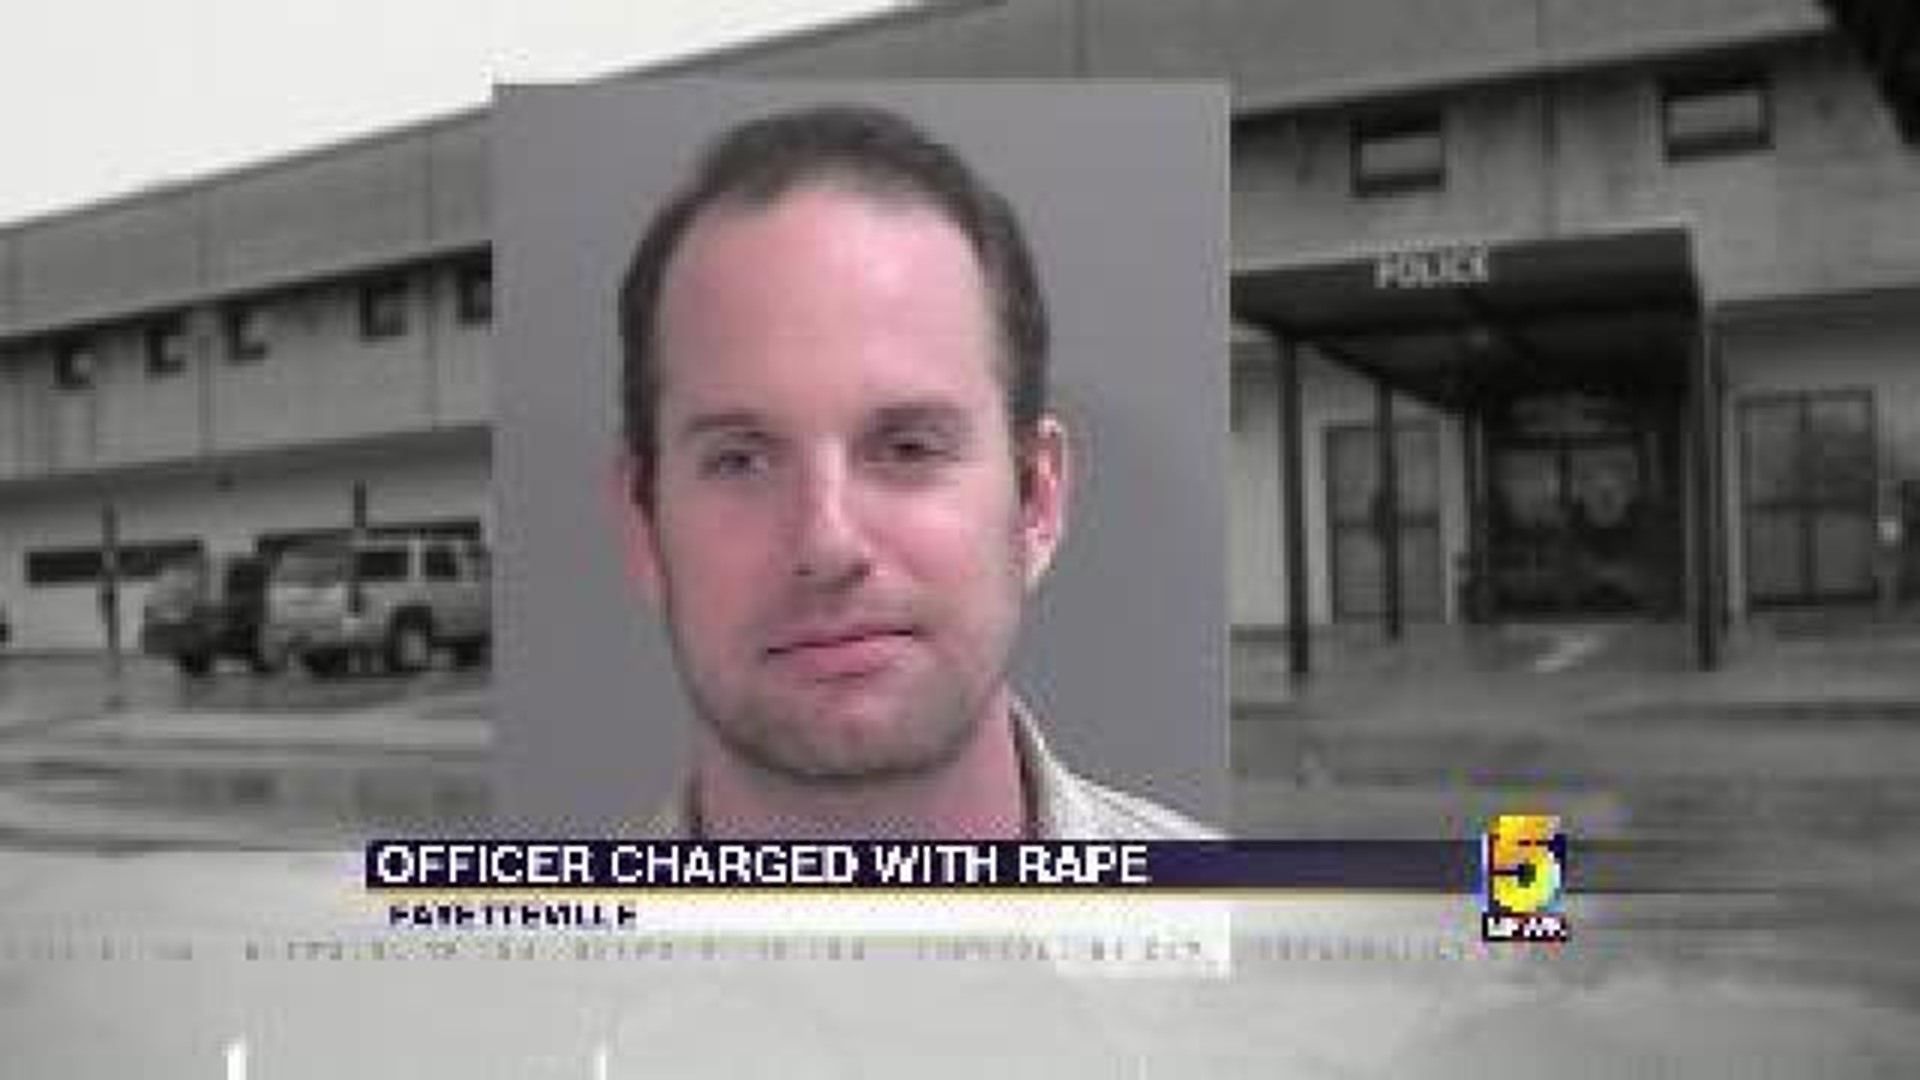 Officer Charged With Rape Update